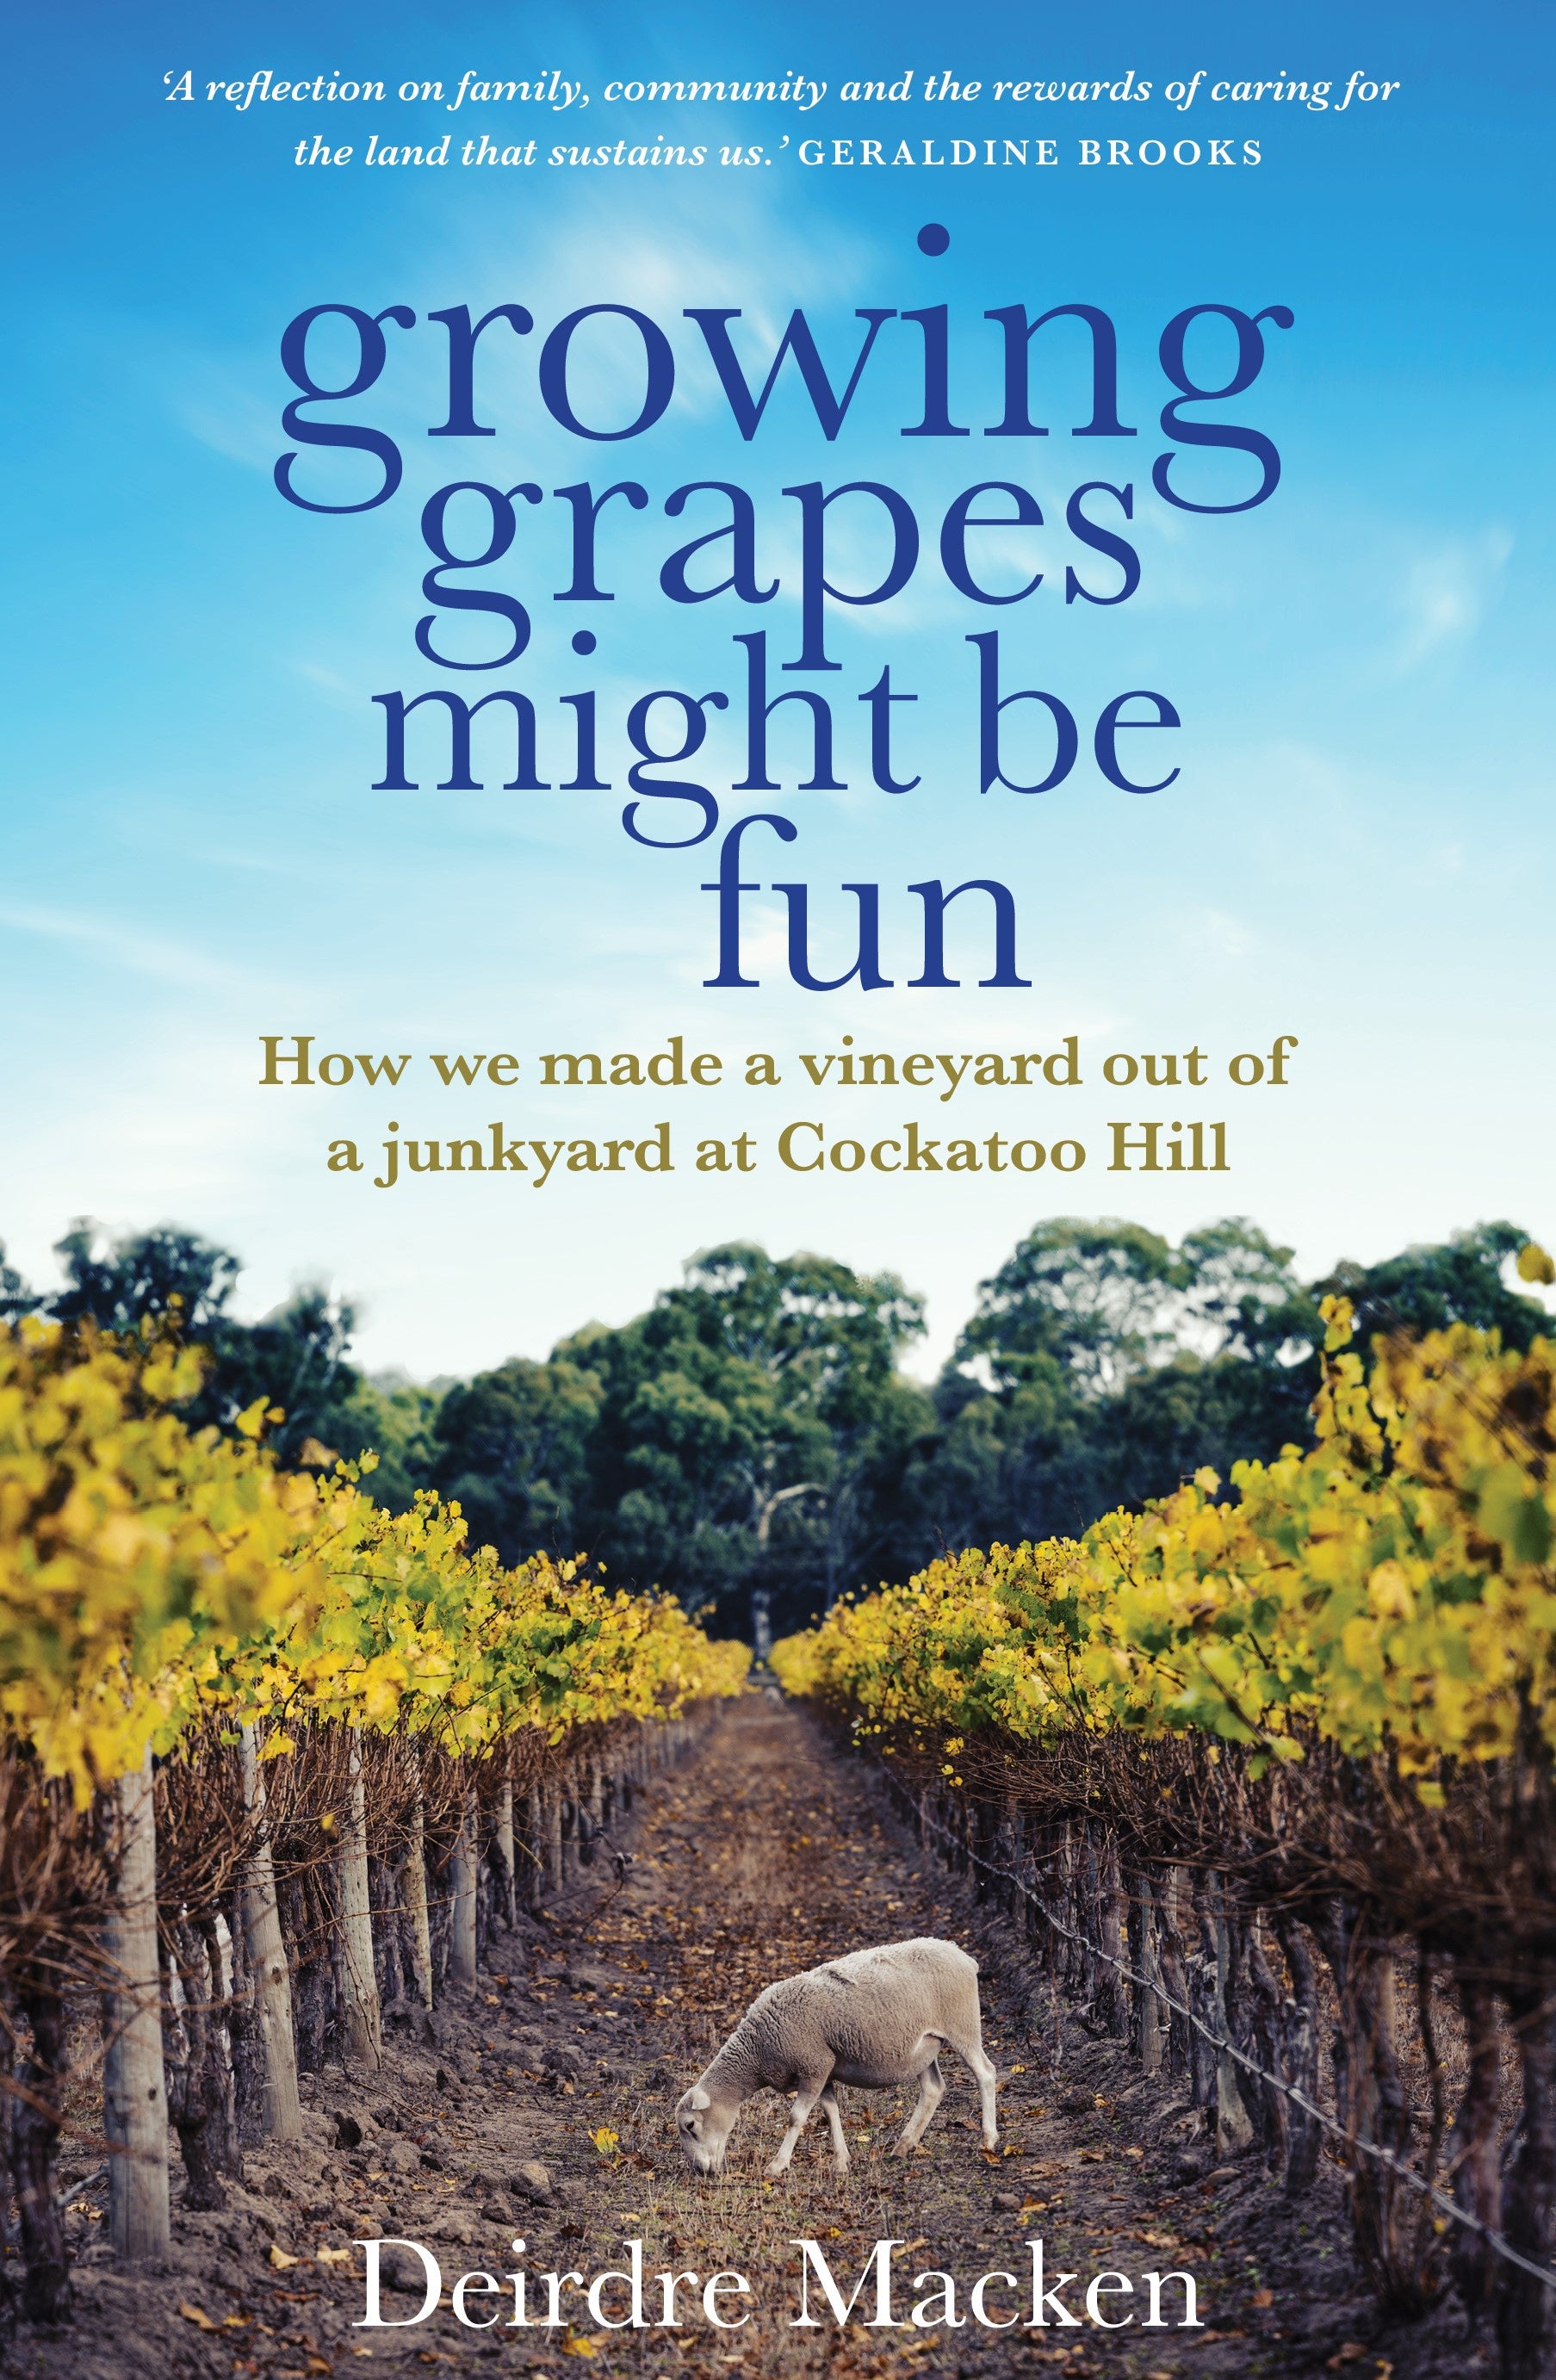 Growing Grapes Might be Fun: How We Made a Vineyard Out of a Junkyard at Cockatoo Hill